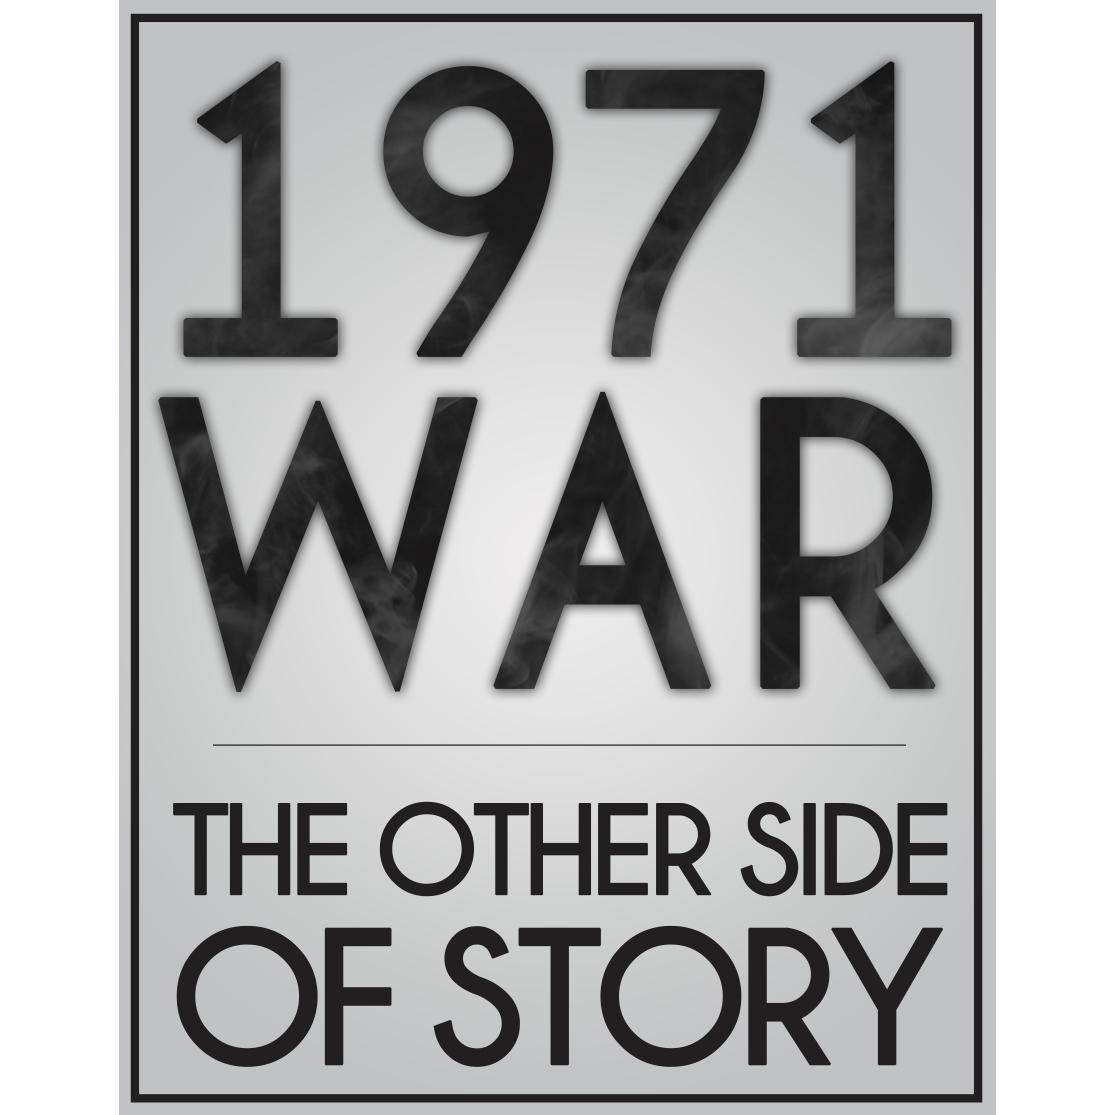 A narrative about war already exists but do we really know the other side of the story? So EastPakWar consists of the conflicting narratives of the 1971 war.